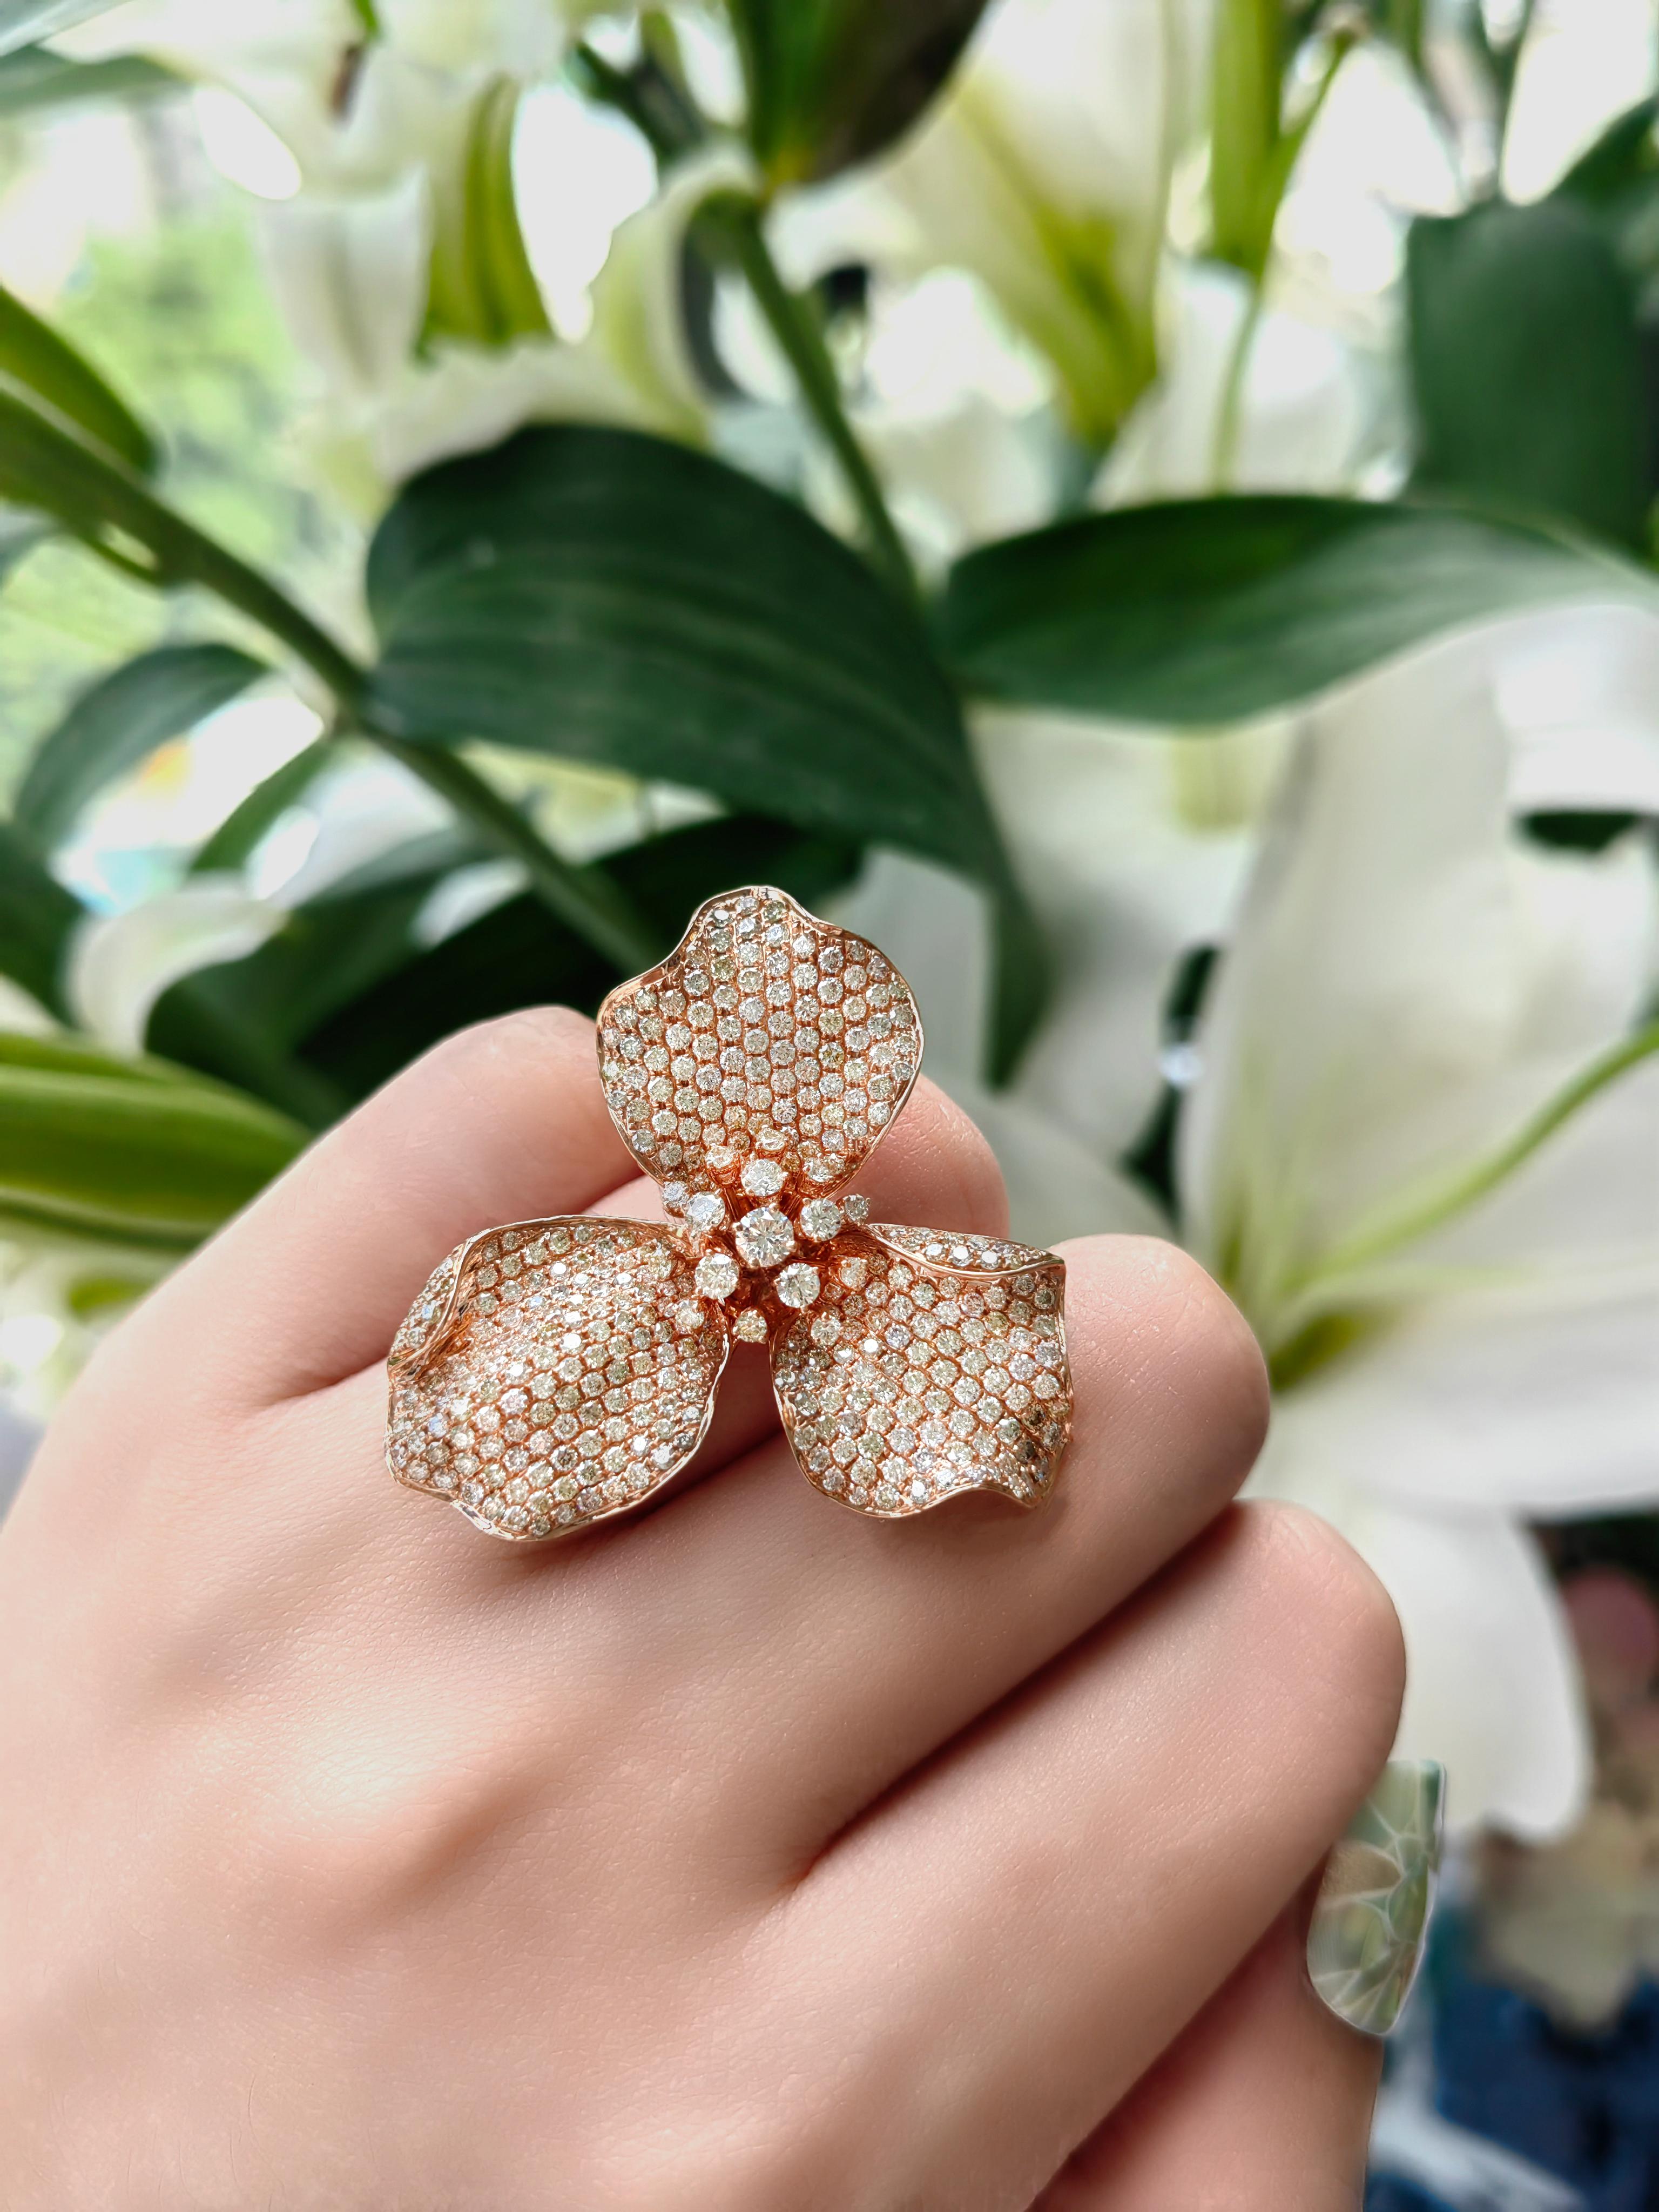 18K Rose Gold Trillium Three-Petal Flower Colored Diamond Cocktail Ring
US Size: 6.5

338 Colored Diamonds - 3.94 CT
18K Rose Gold - 11.16 GM

Trillium symbolizes consciousness, embodiment and mutuality. It is a symbol of elegance and precision. Our